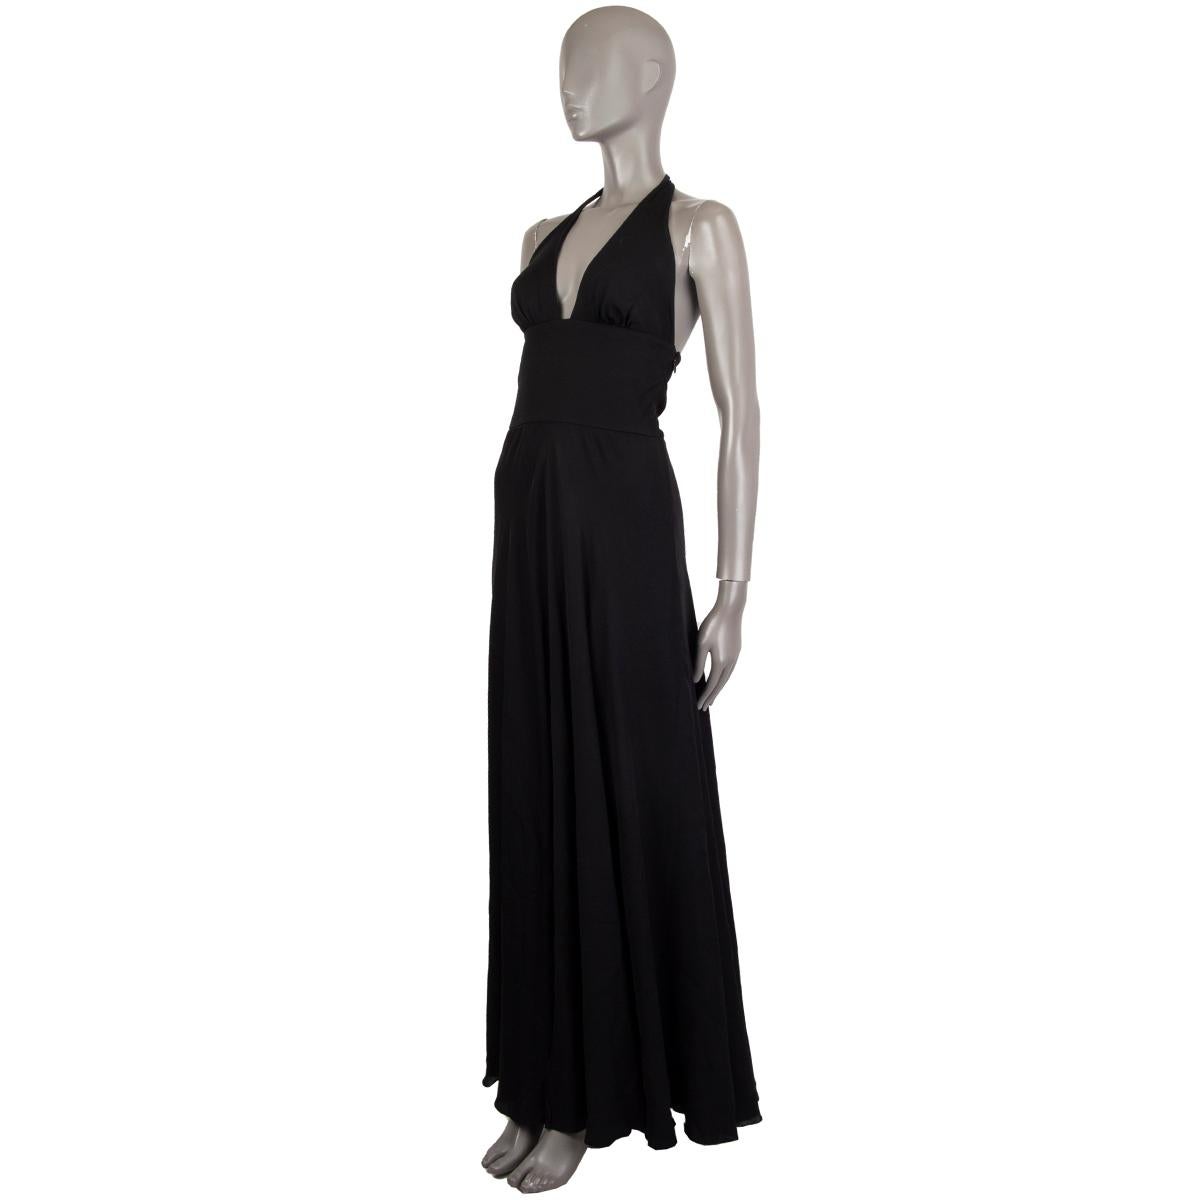 Valentino long evening dress in black missing tag (probably silk blend) with a slit in the front, halter neck closes two buttons and snap-buttons, deep cut-out and close fit around the waist, A-line skirt and an open back. Lined in black fabric